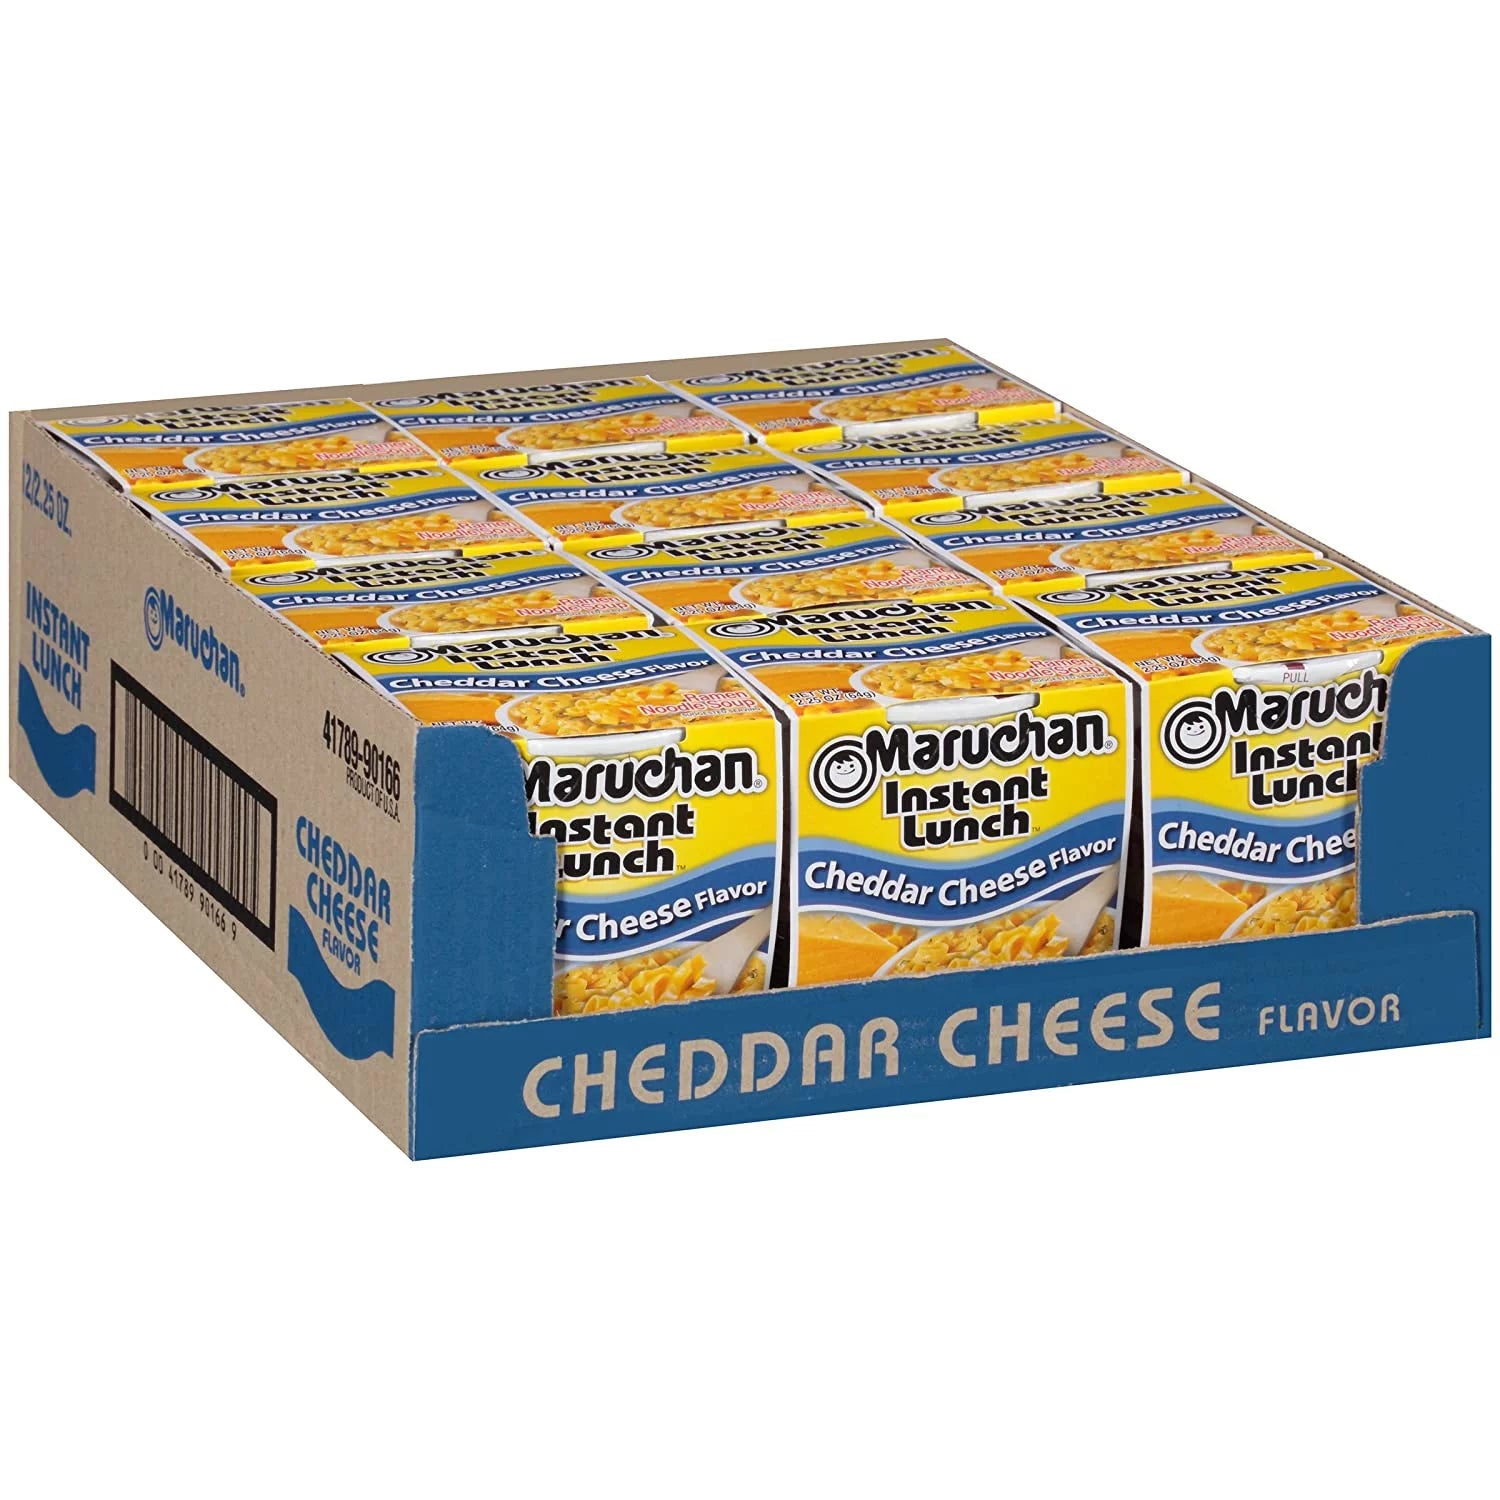 Maruchan Instant Lunch Cheddar Cheese Flavor 2.25oz (Pack of 12)